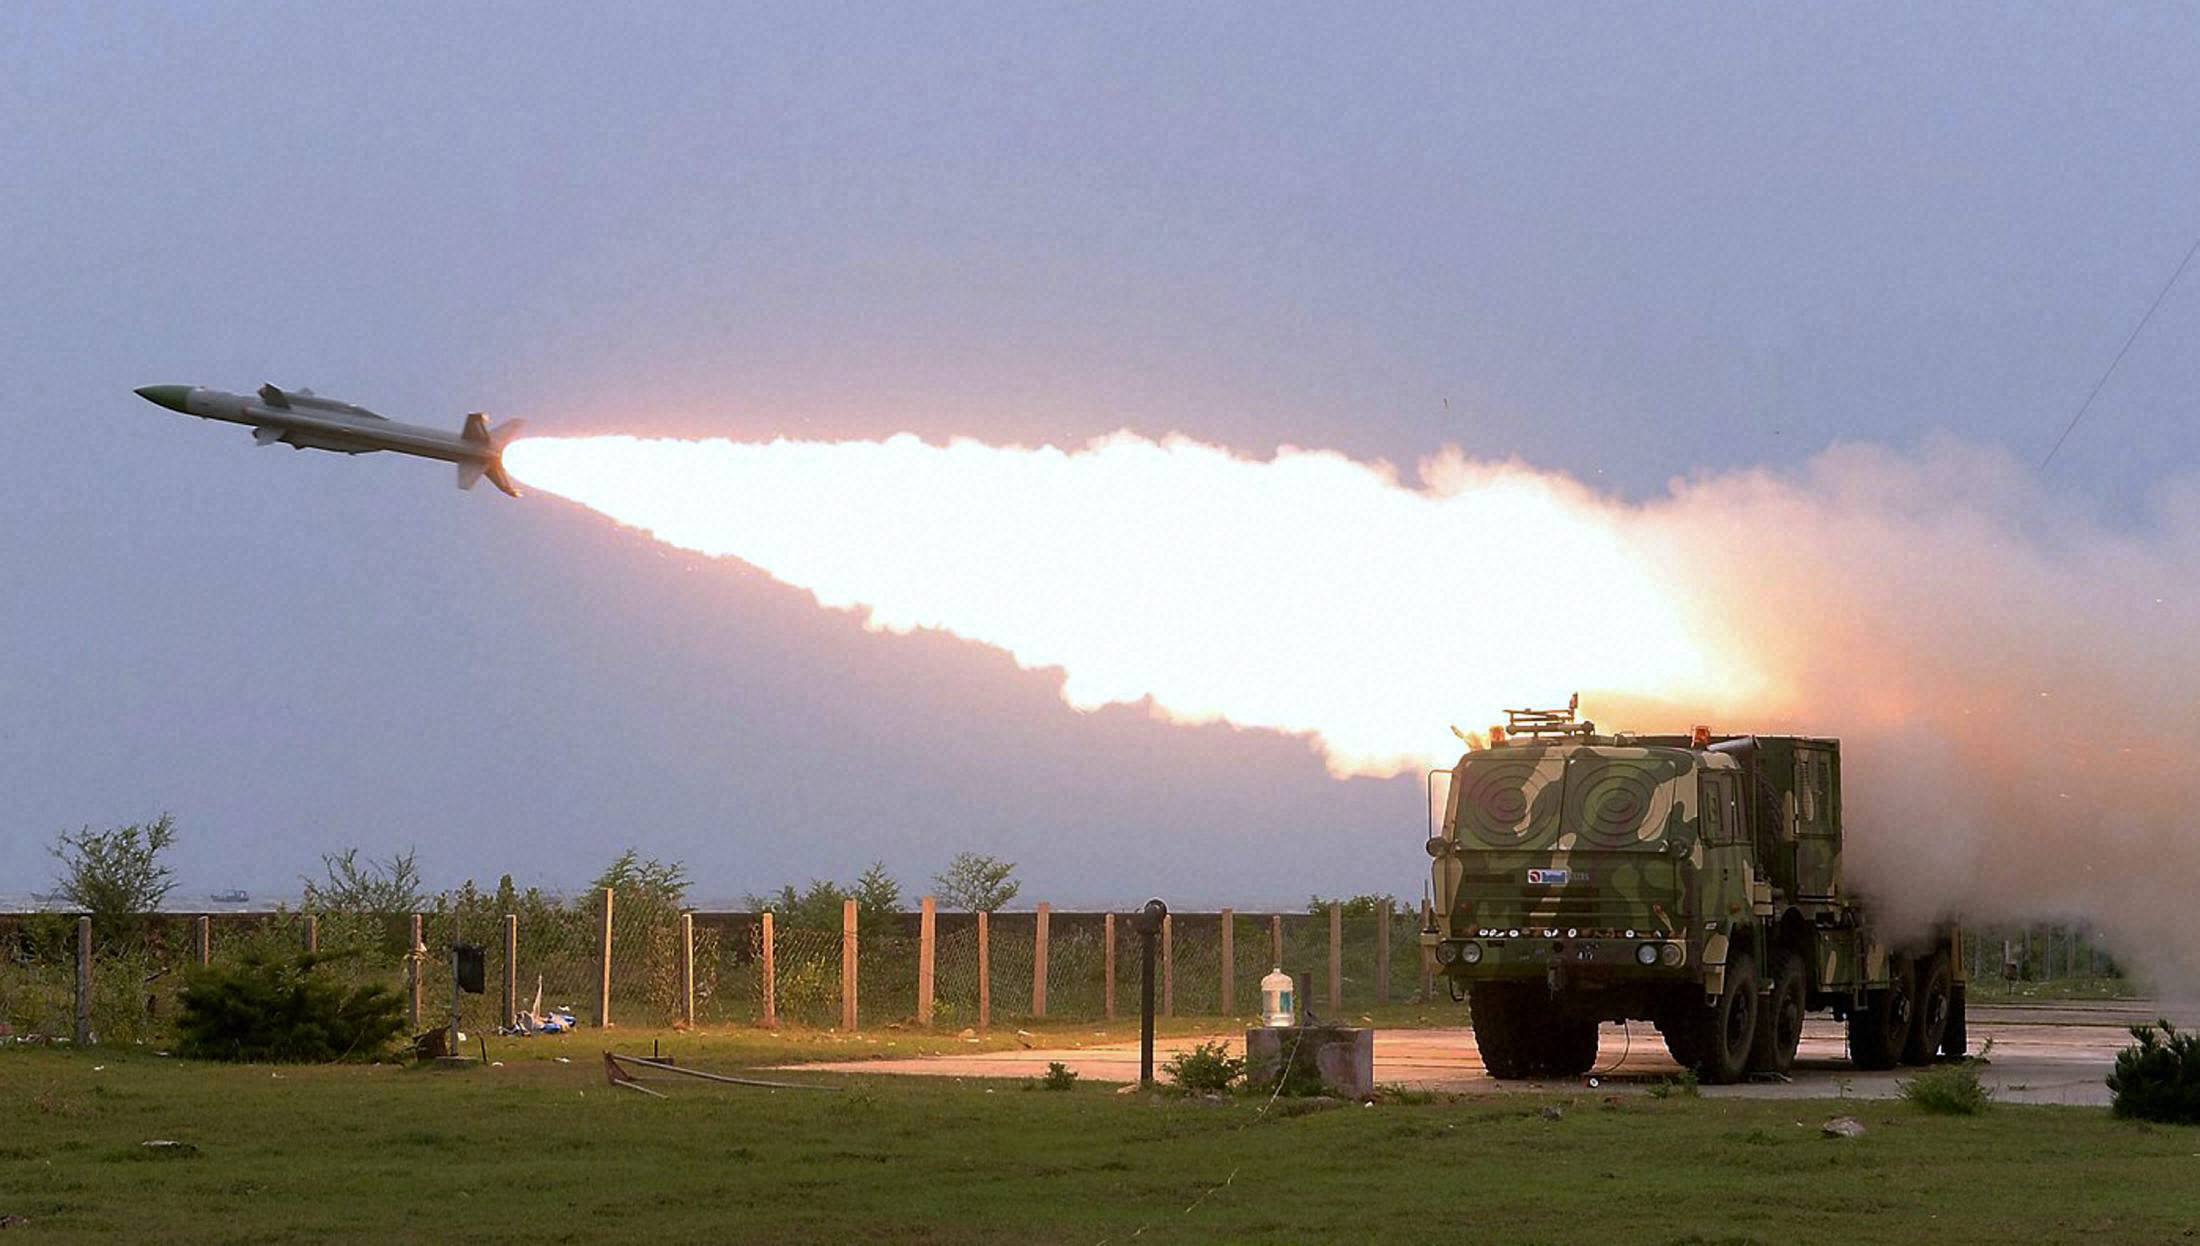 Akash missile test fired successfully for third consecutive day